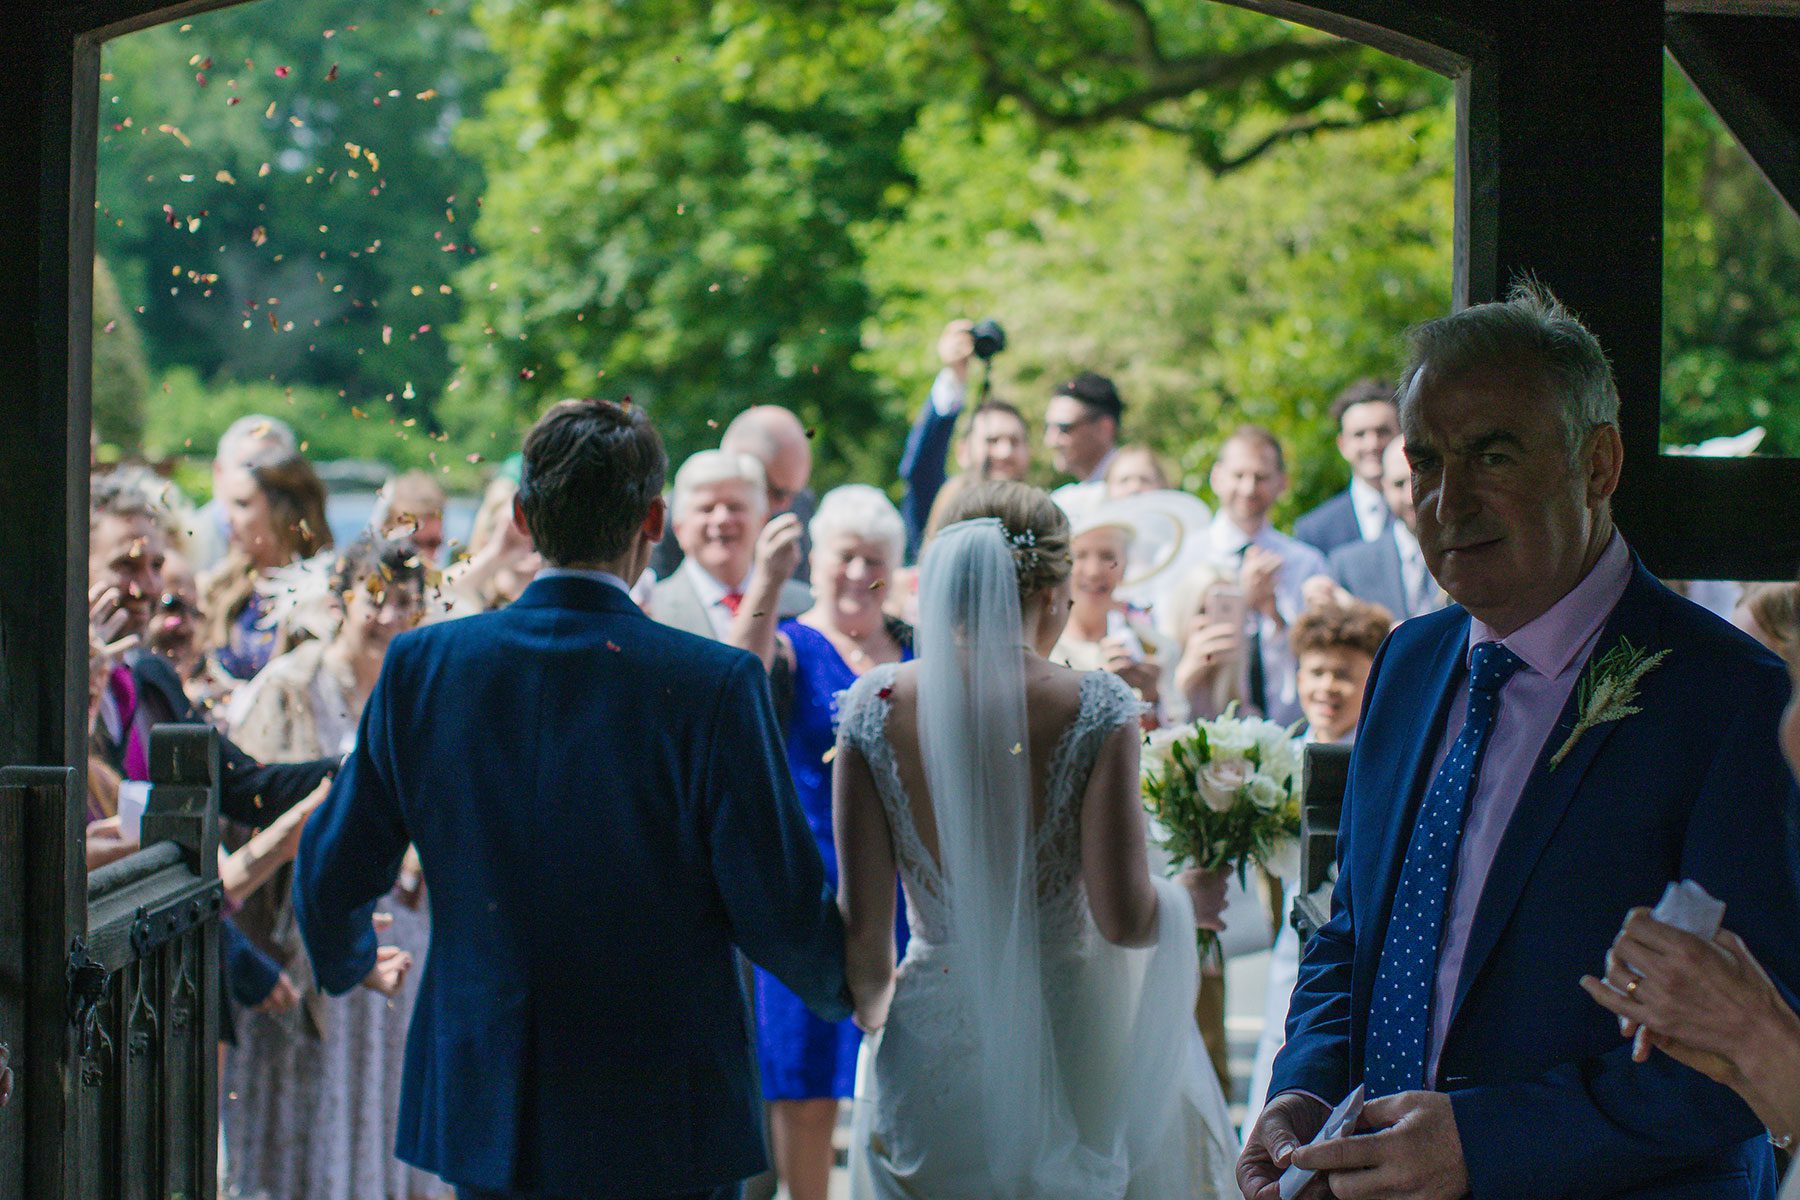 Confetti - Reportage Wedding Photography in Cheltenham, Gloucestershire & the Cotswolds | Bullit Photography.